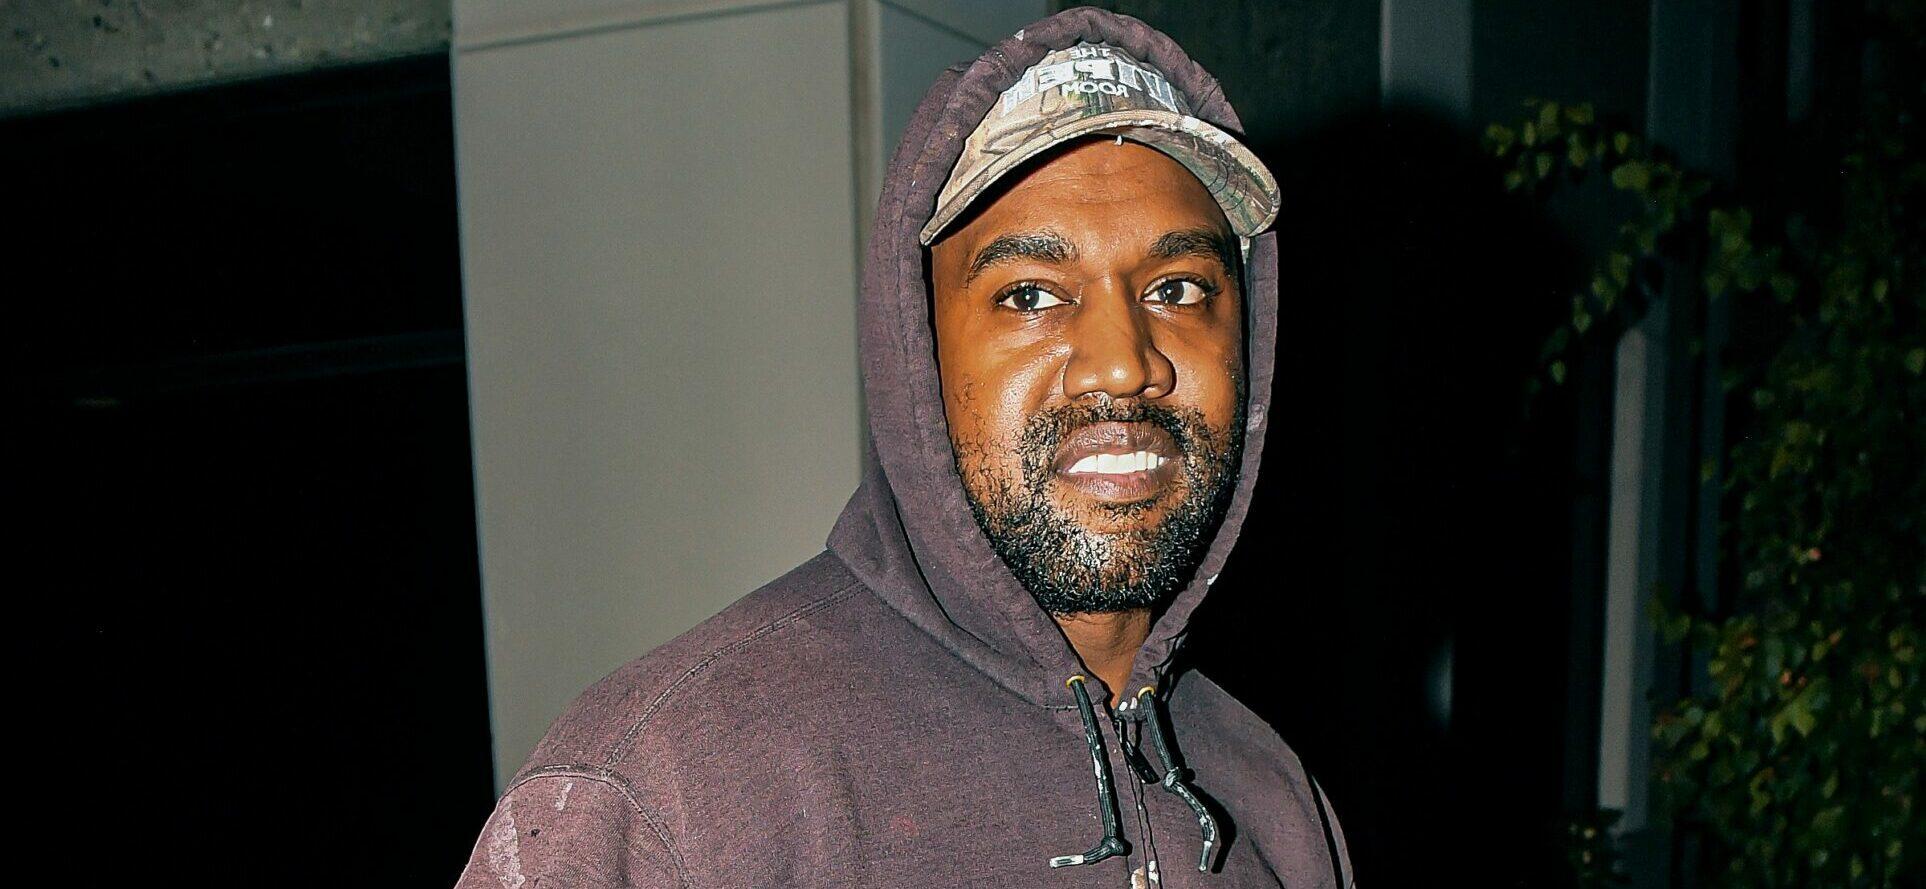 Kanye West Is All Smiles amp Unbothered As He Held A Mini Press Conference At His Daughter North apos s Basketball Game In Thousand Oaks CA